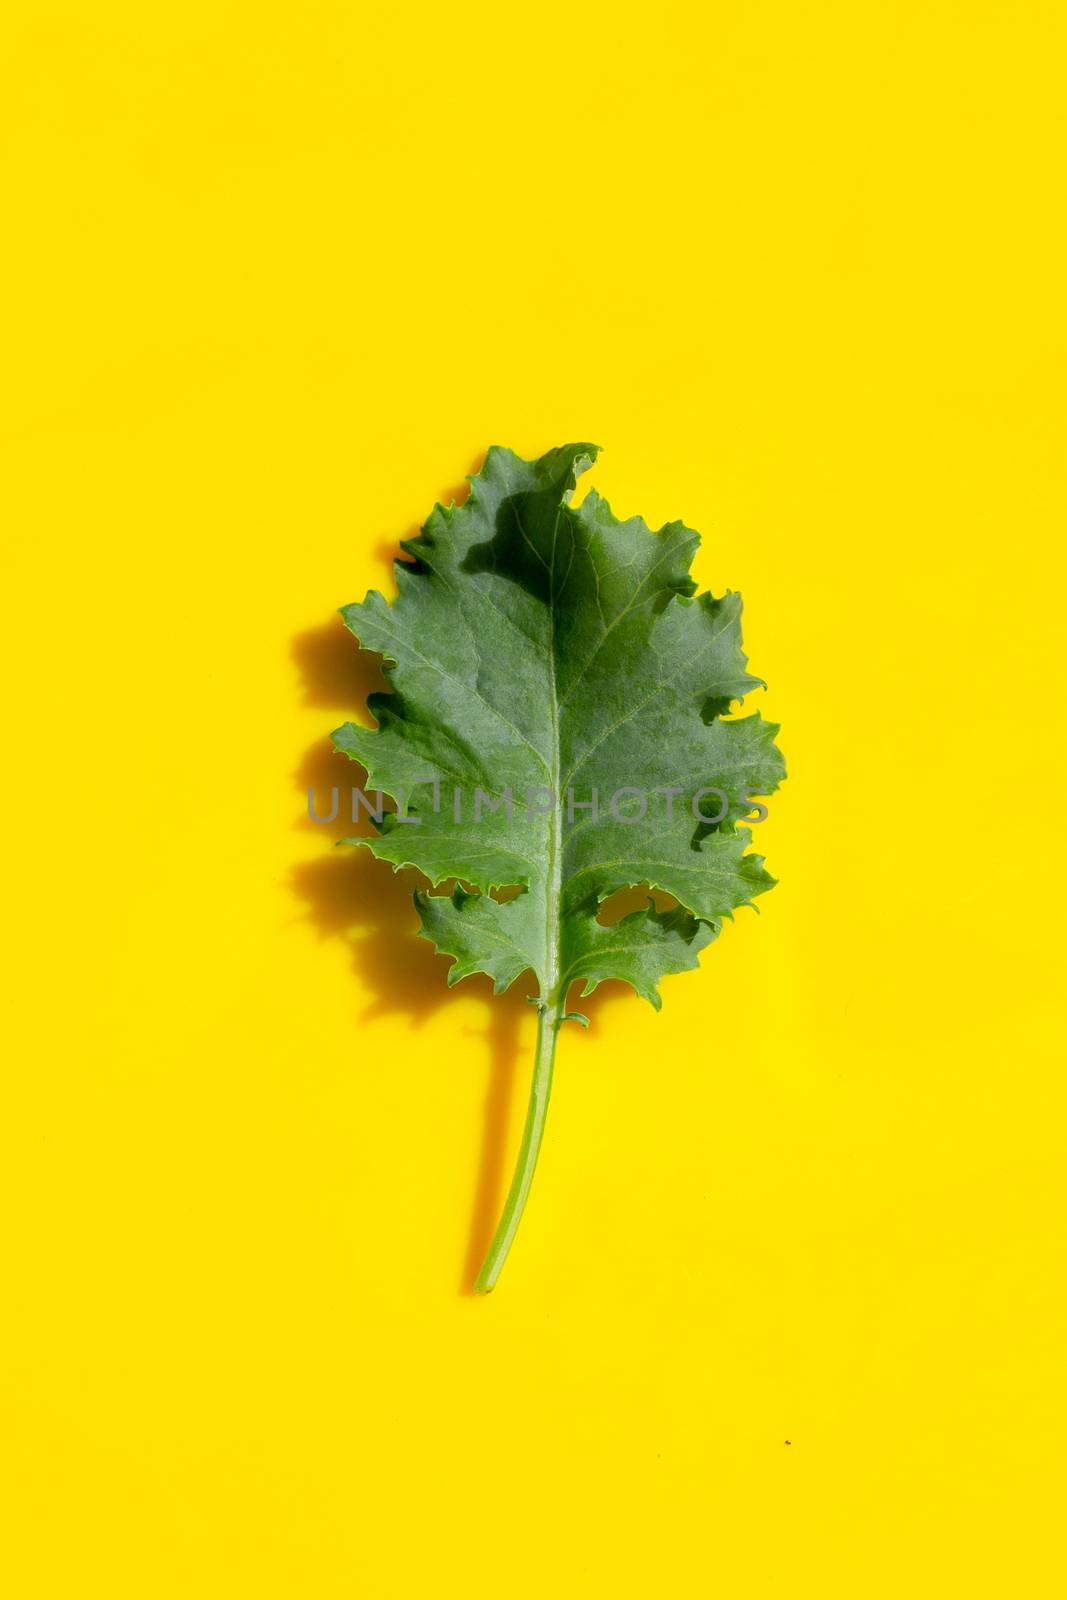 Kale leaf on yellow background. Copy space